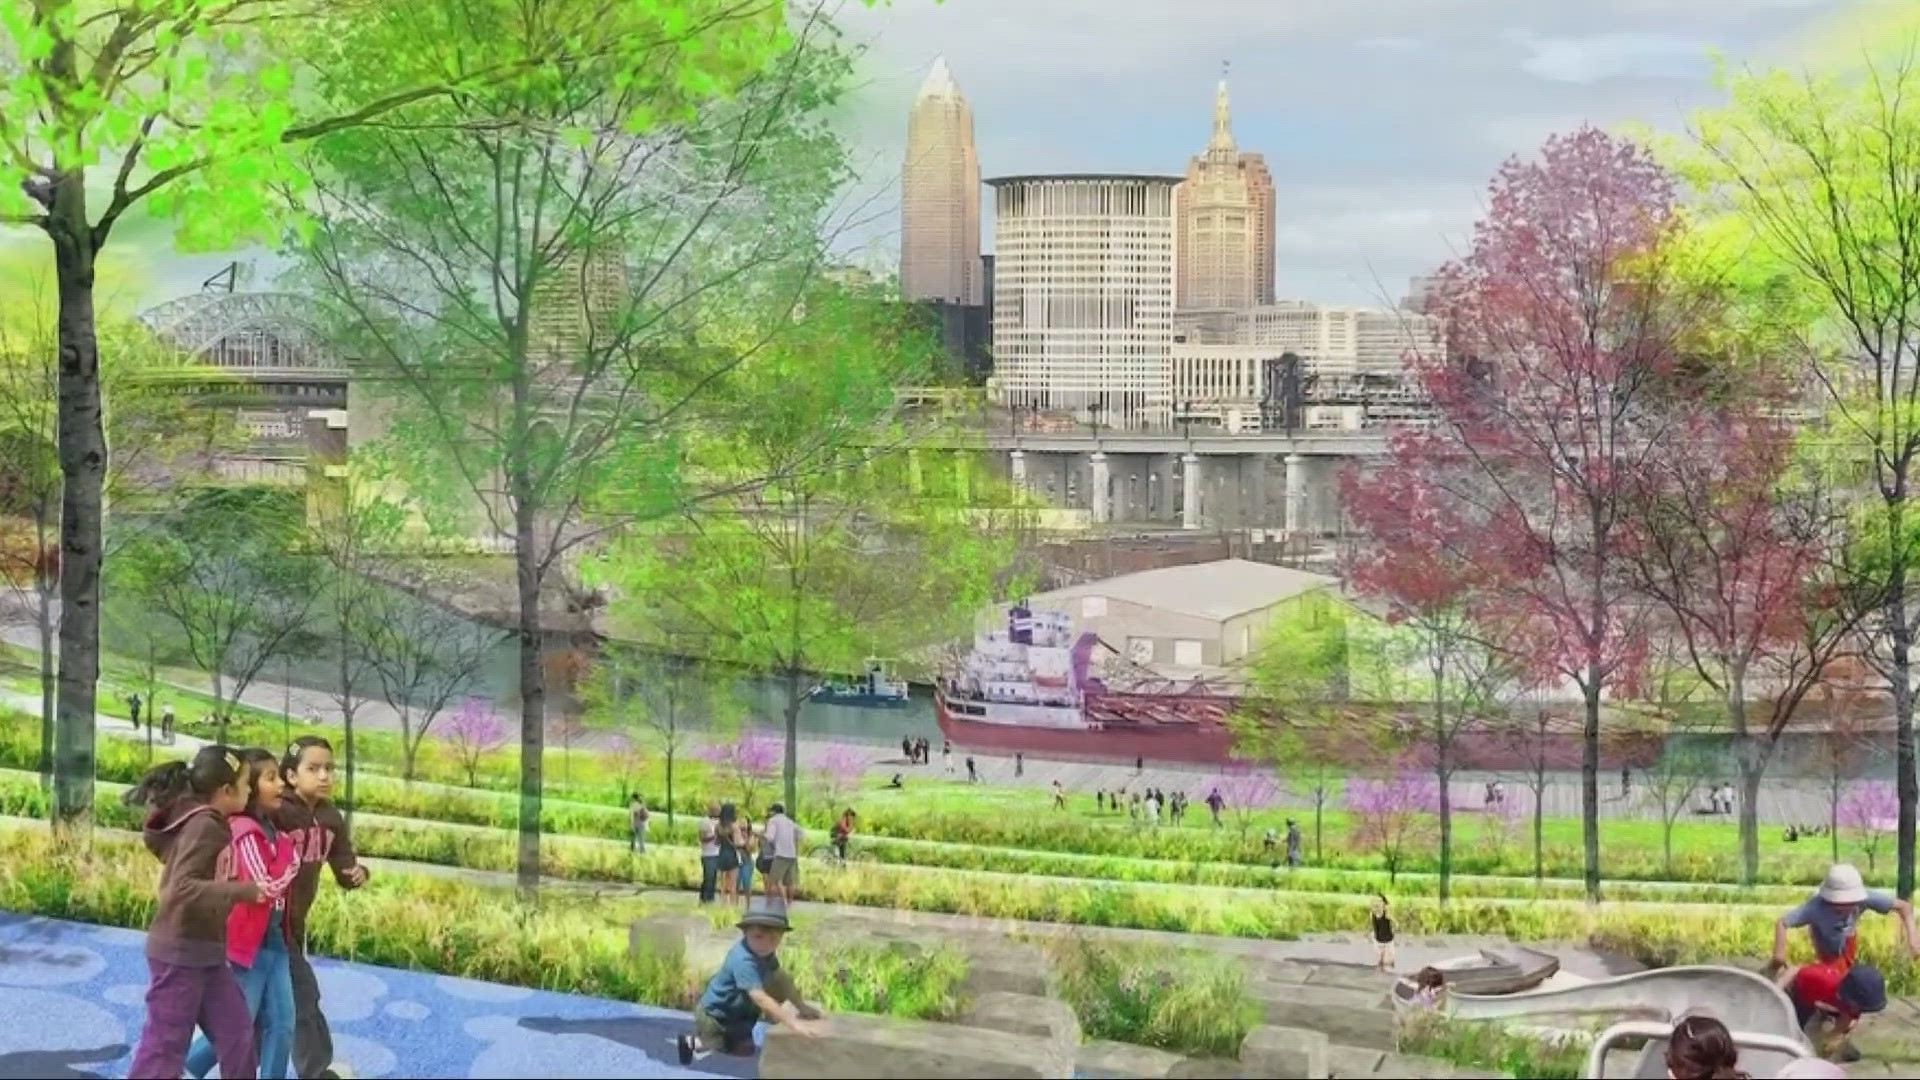 Among the allocations from American Rescue Plan Act funds will be $3 million towards the design of  a land bridge to connect Mall C to the lakefront.